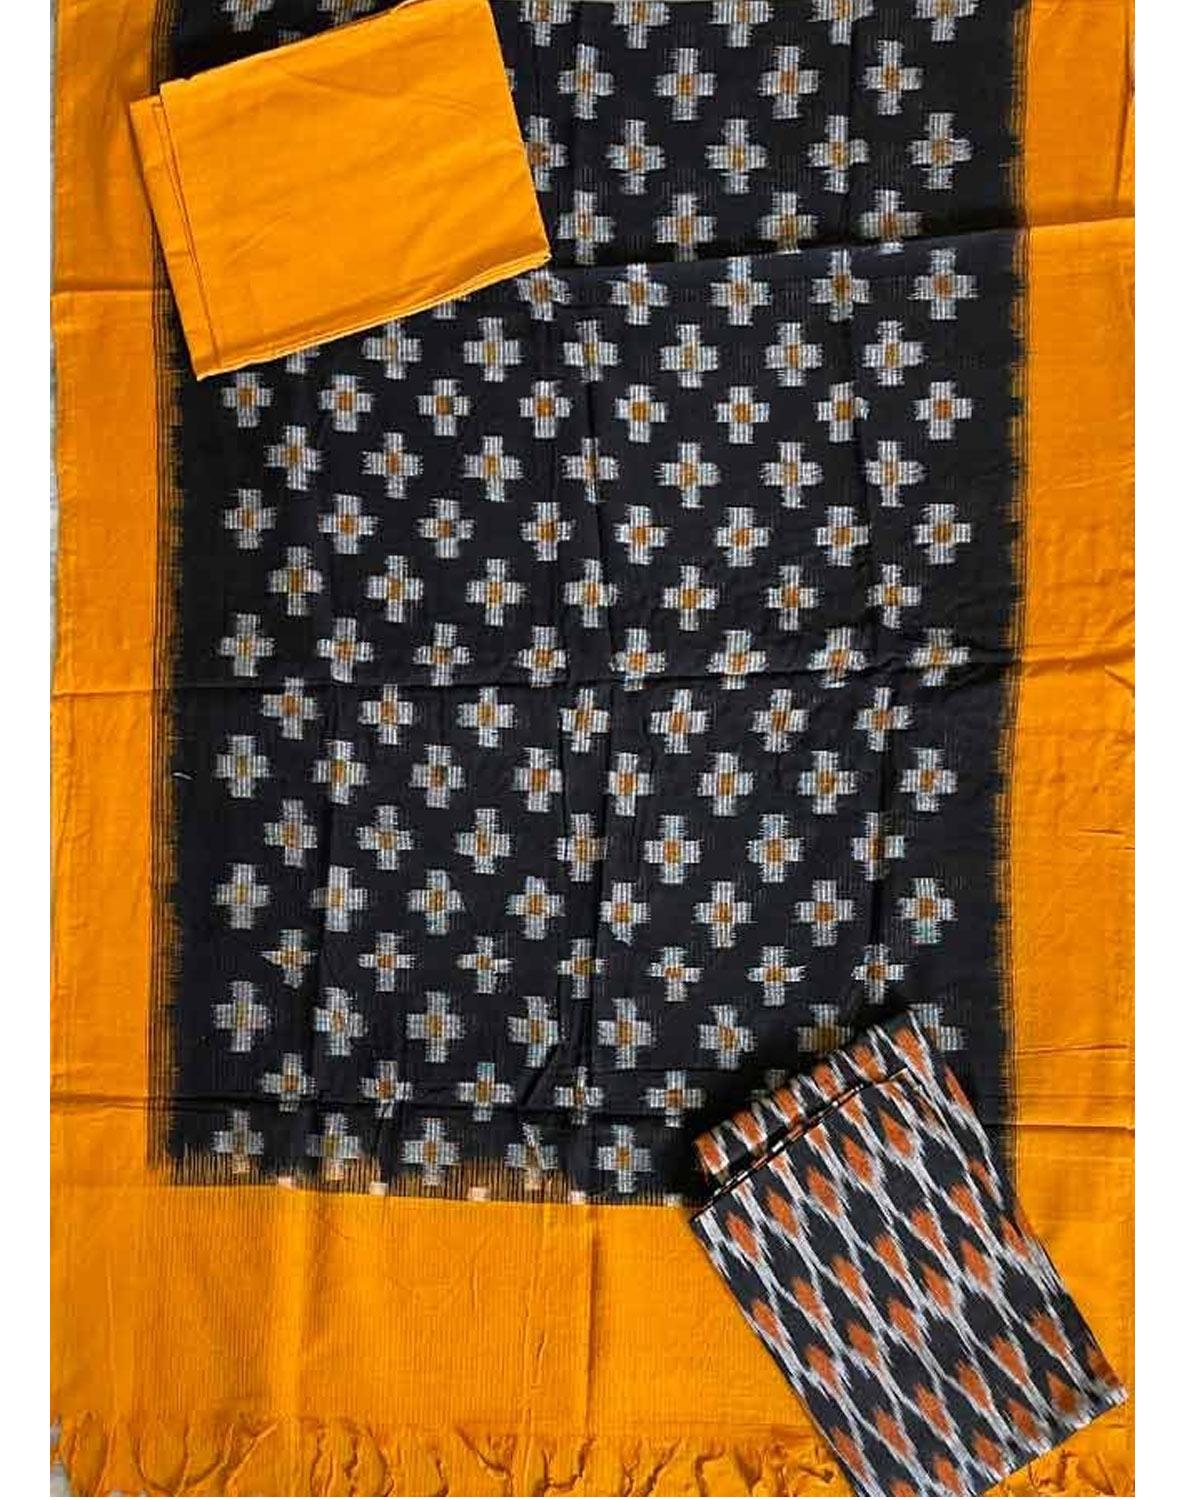 DOUBLE IKAT COTTON BLACK WITH YELLOW COLOR DRESS MATERIAL-B50 - pochampallysarees.com